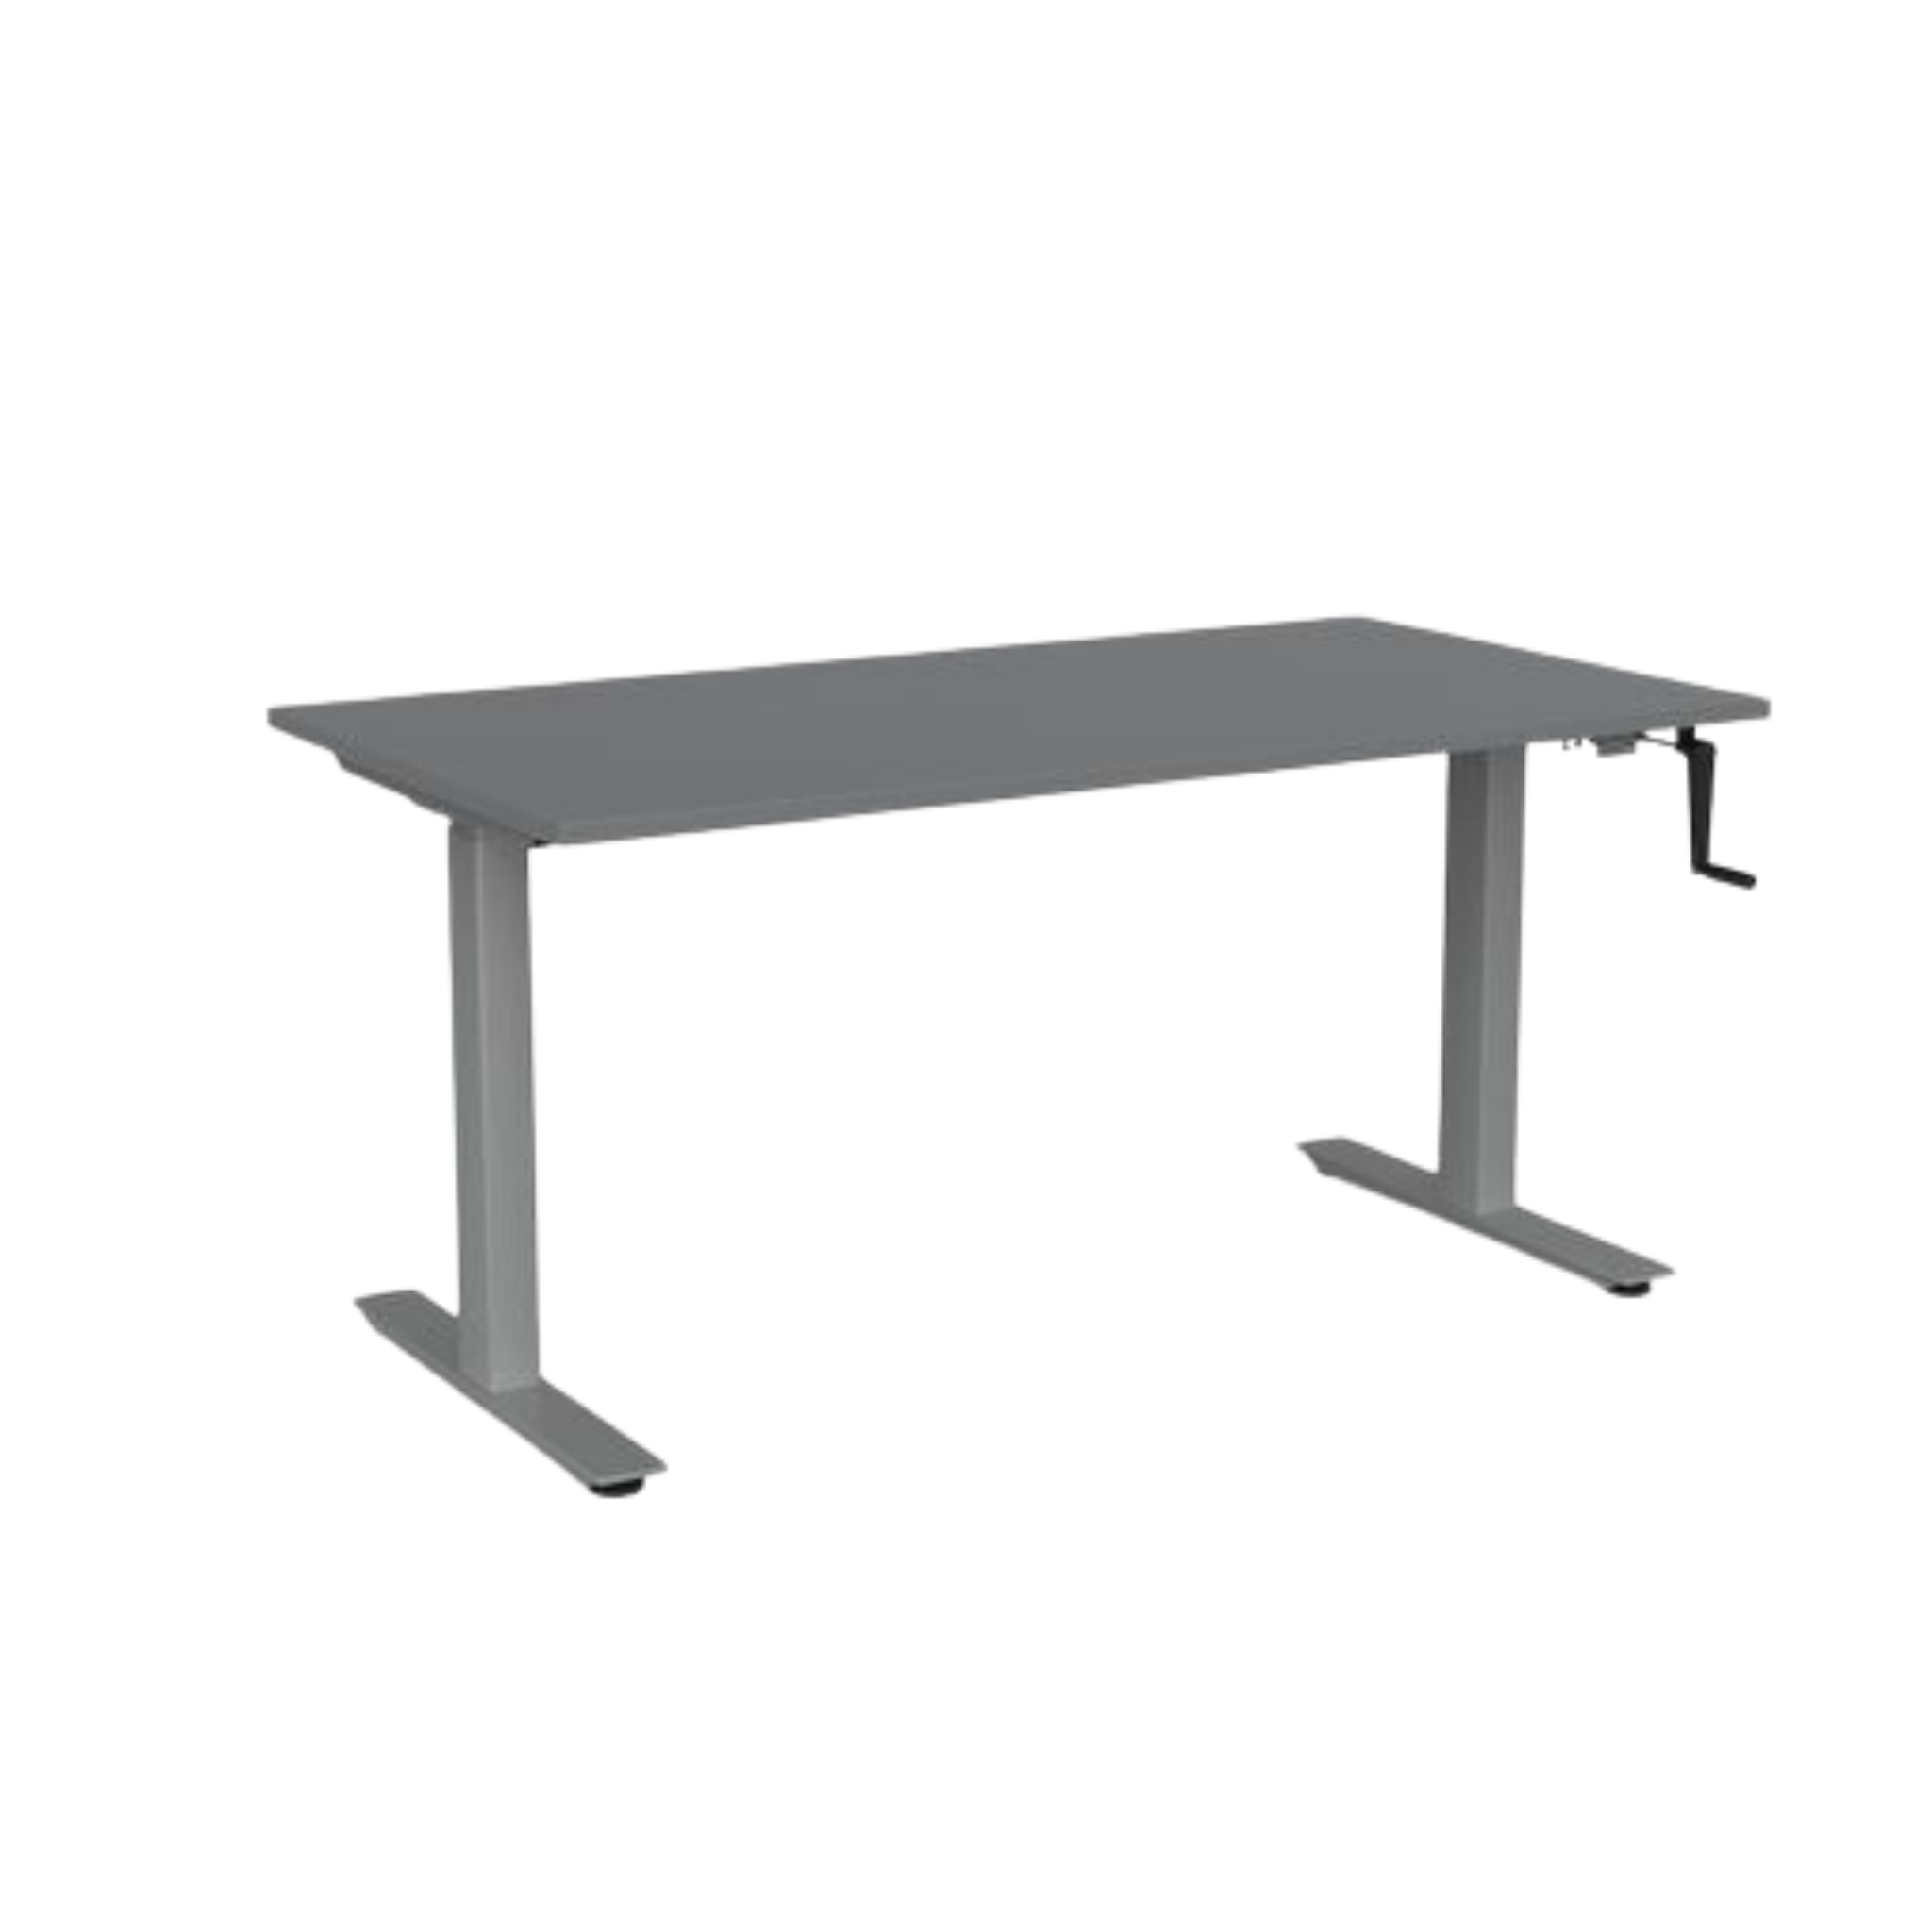 Agile winder sit to stand desk with silver frame and silver top